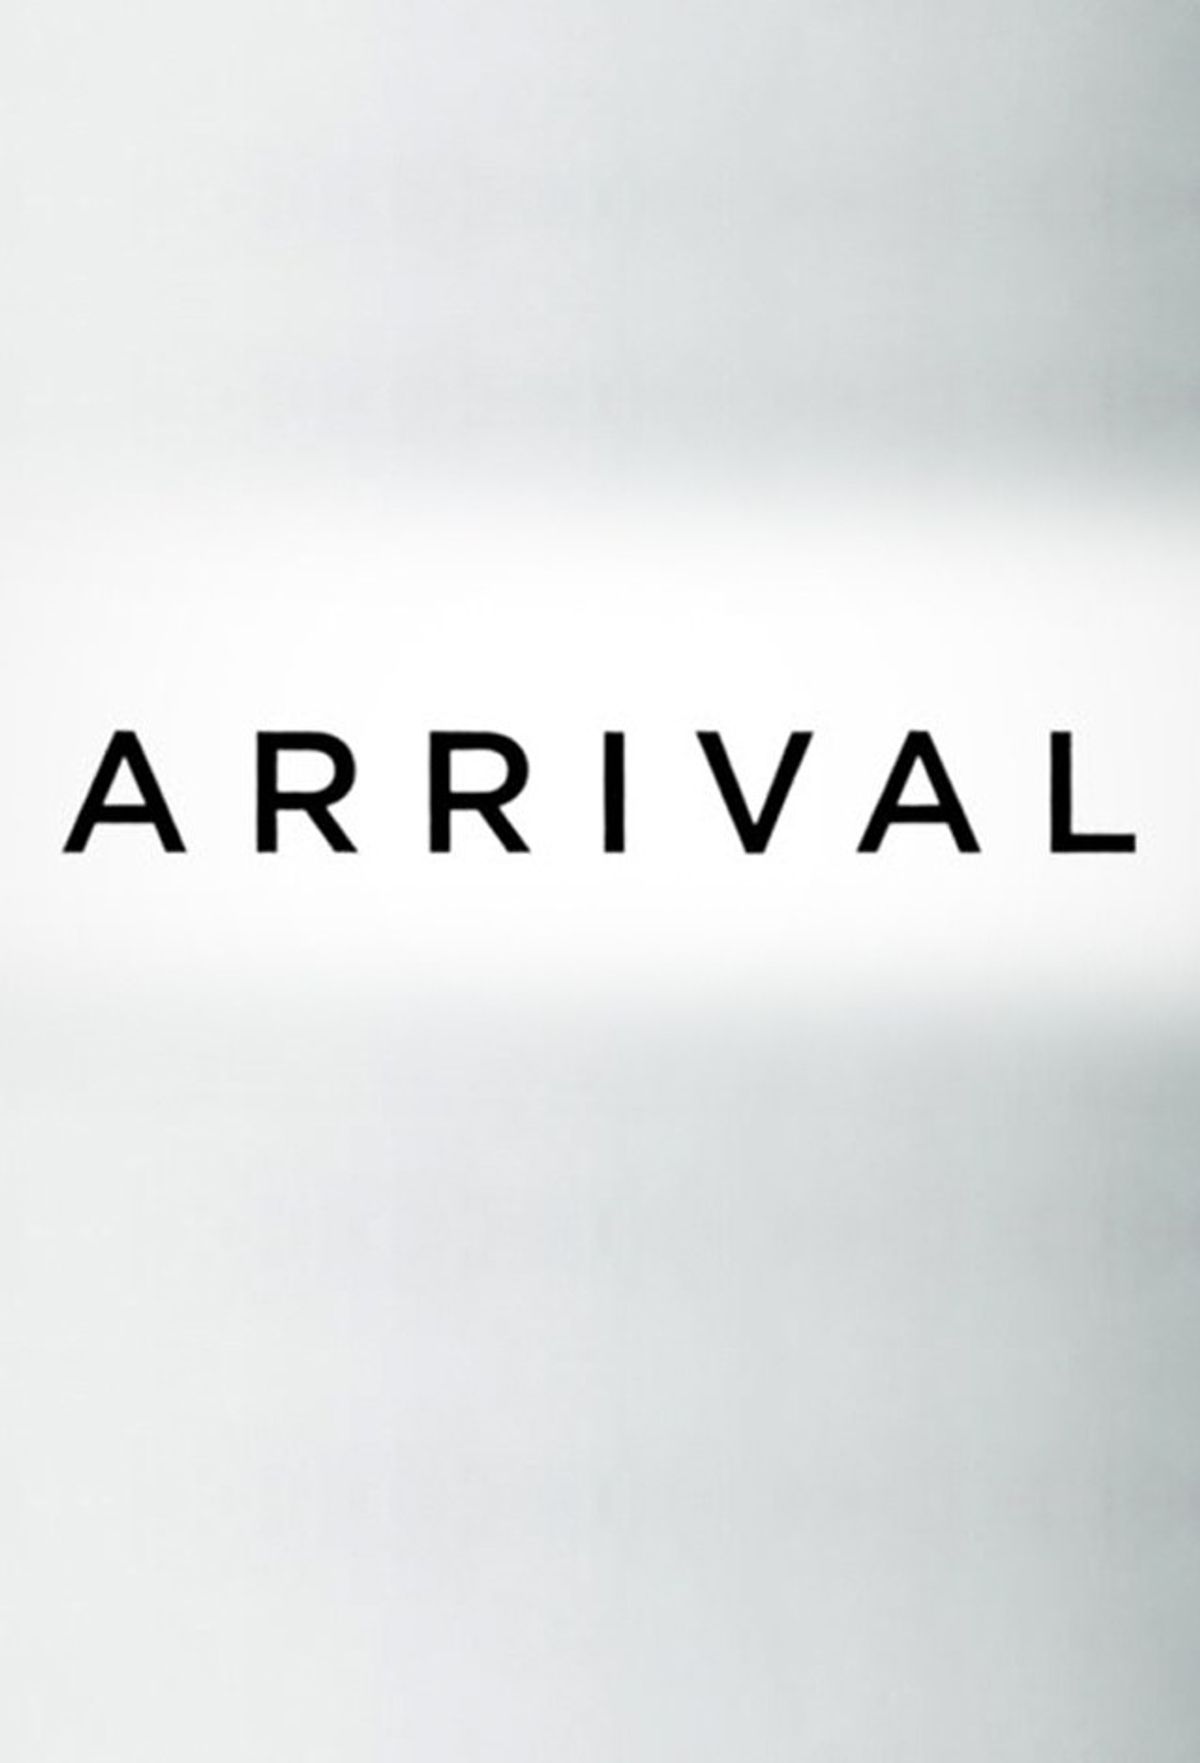 My Non-Spoiler Review of "Arrival"